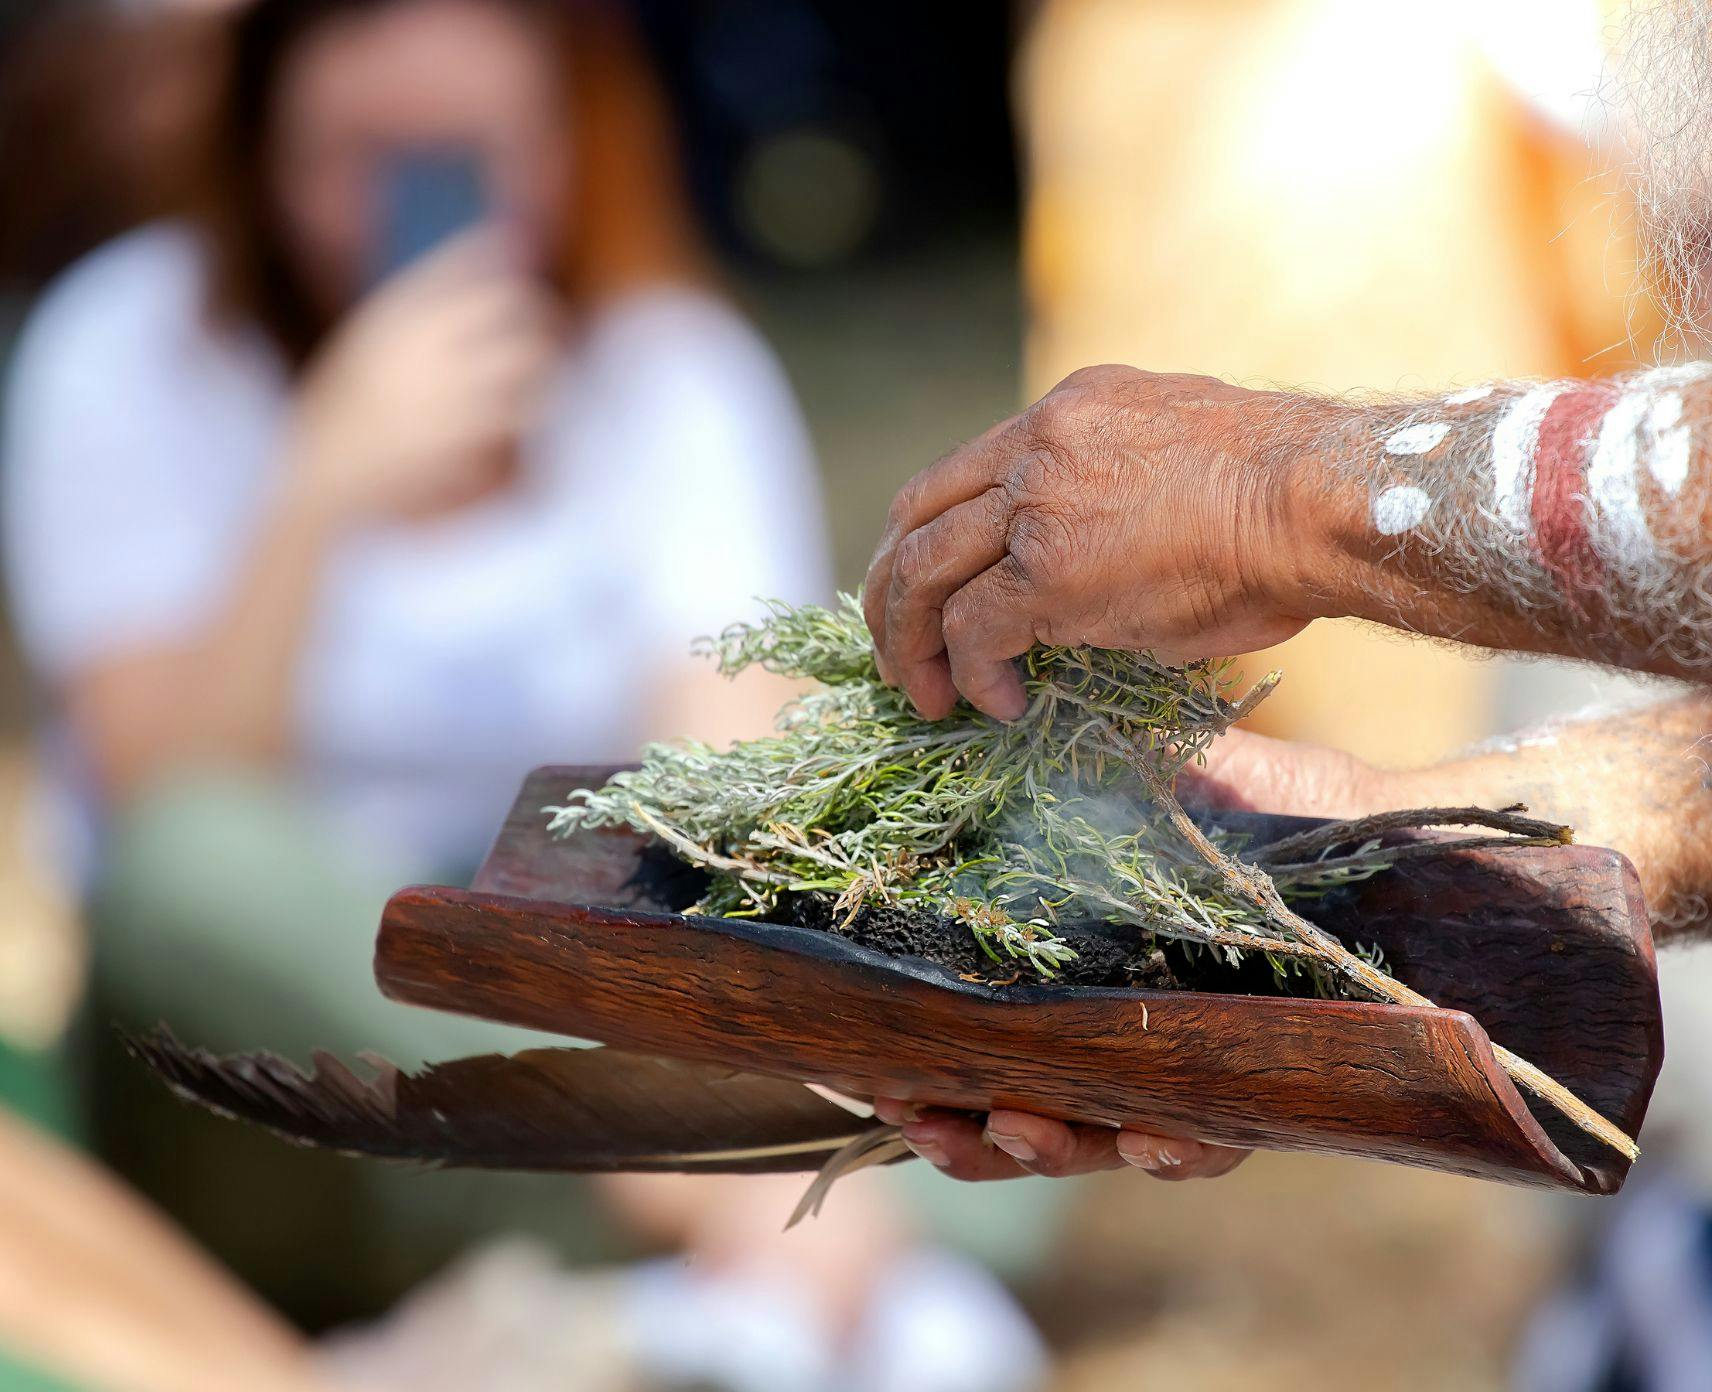 First Nations smoking ceremony at a community event in Australia